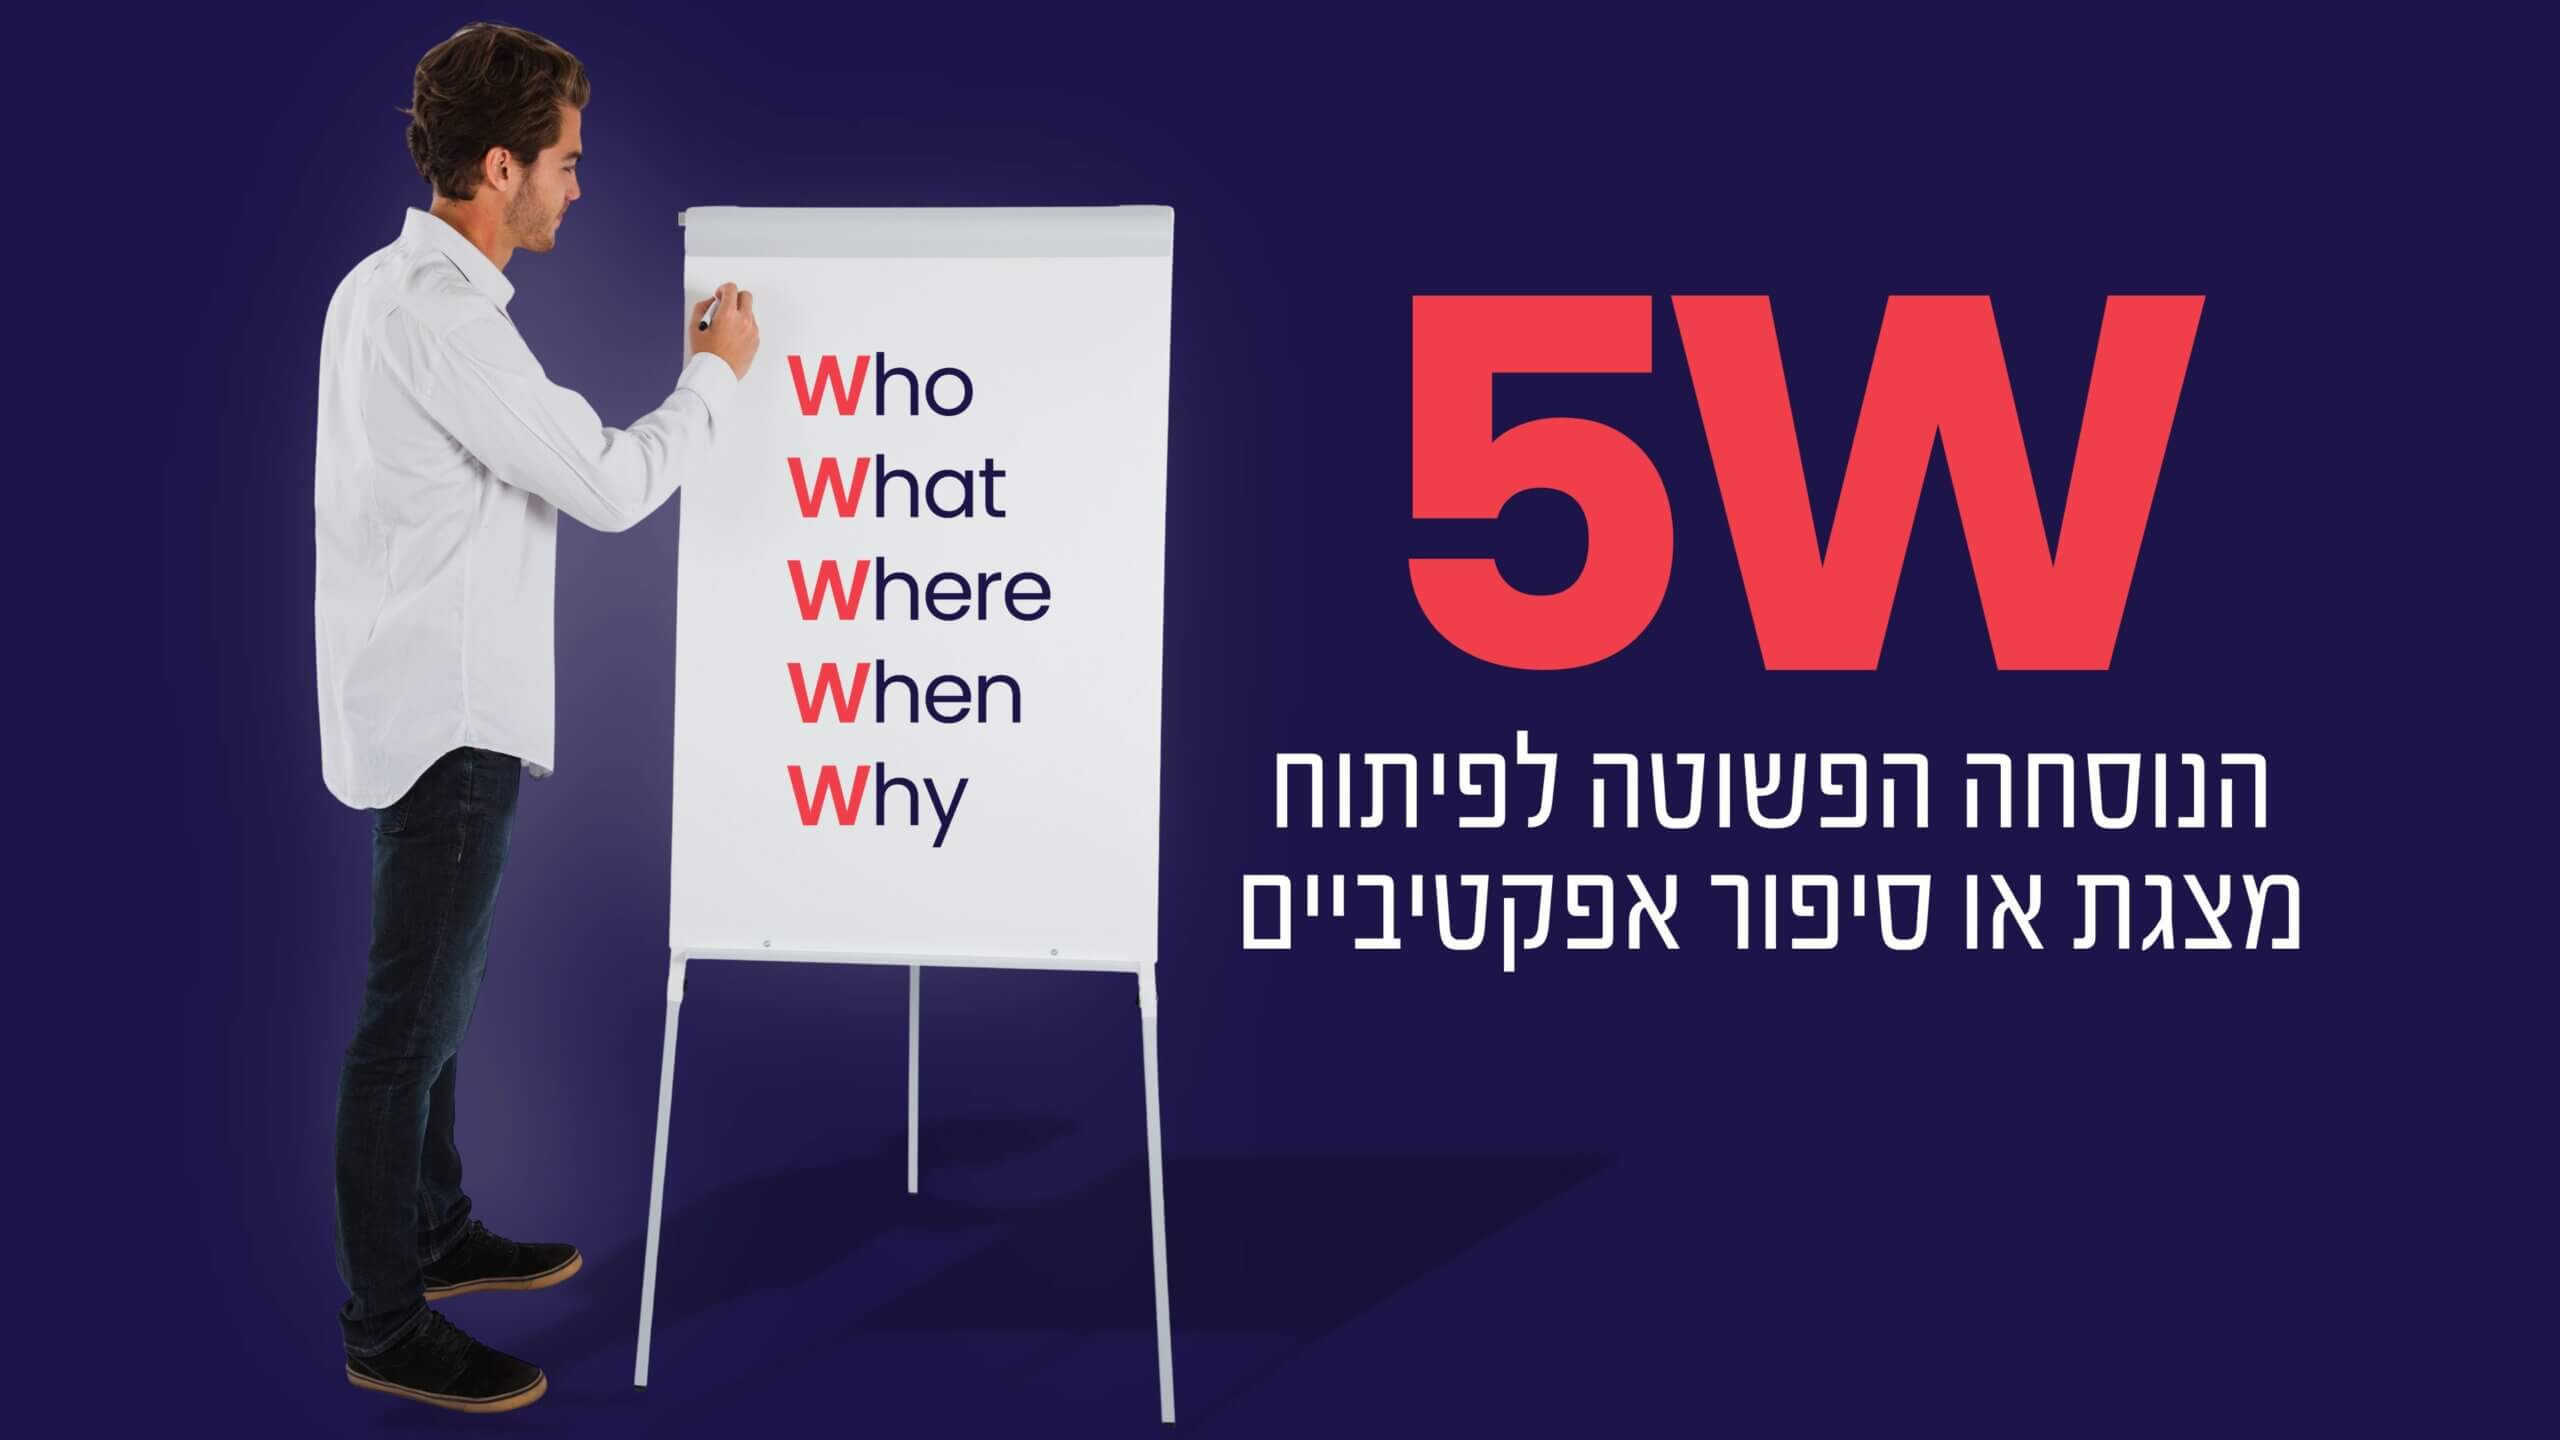 Read more about the article Five W’s (Who, What, Where, When, and Why) הנוסחה הפשוטה לפיתוח מצגת או סיפור אפקטיביים